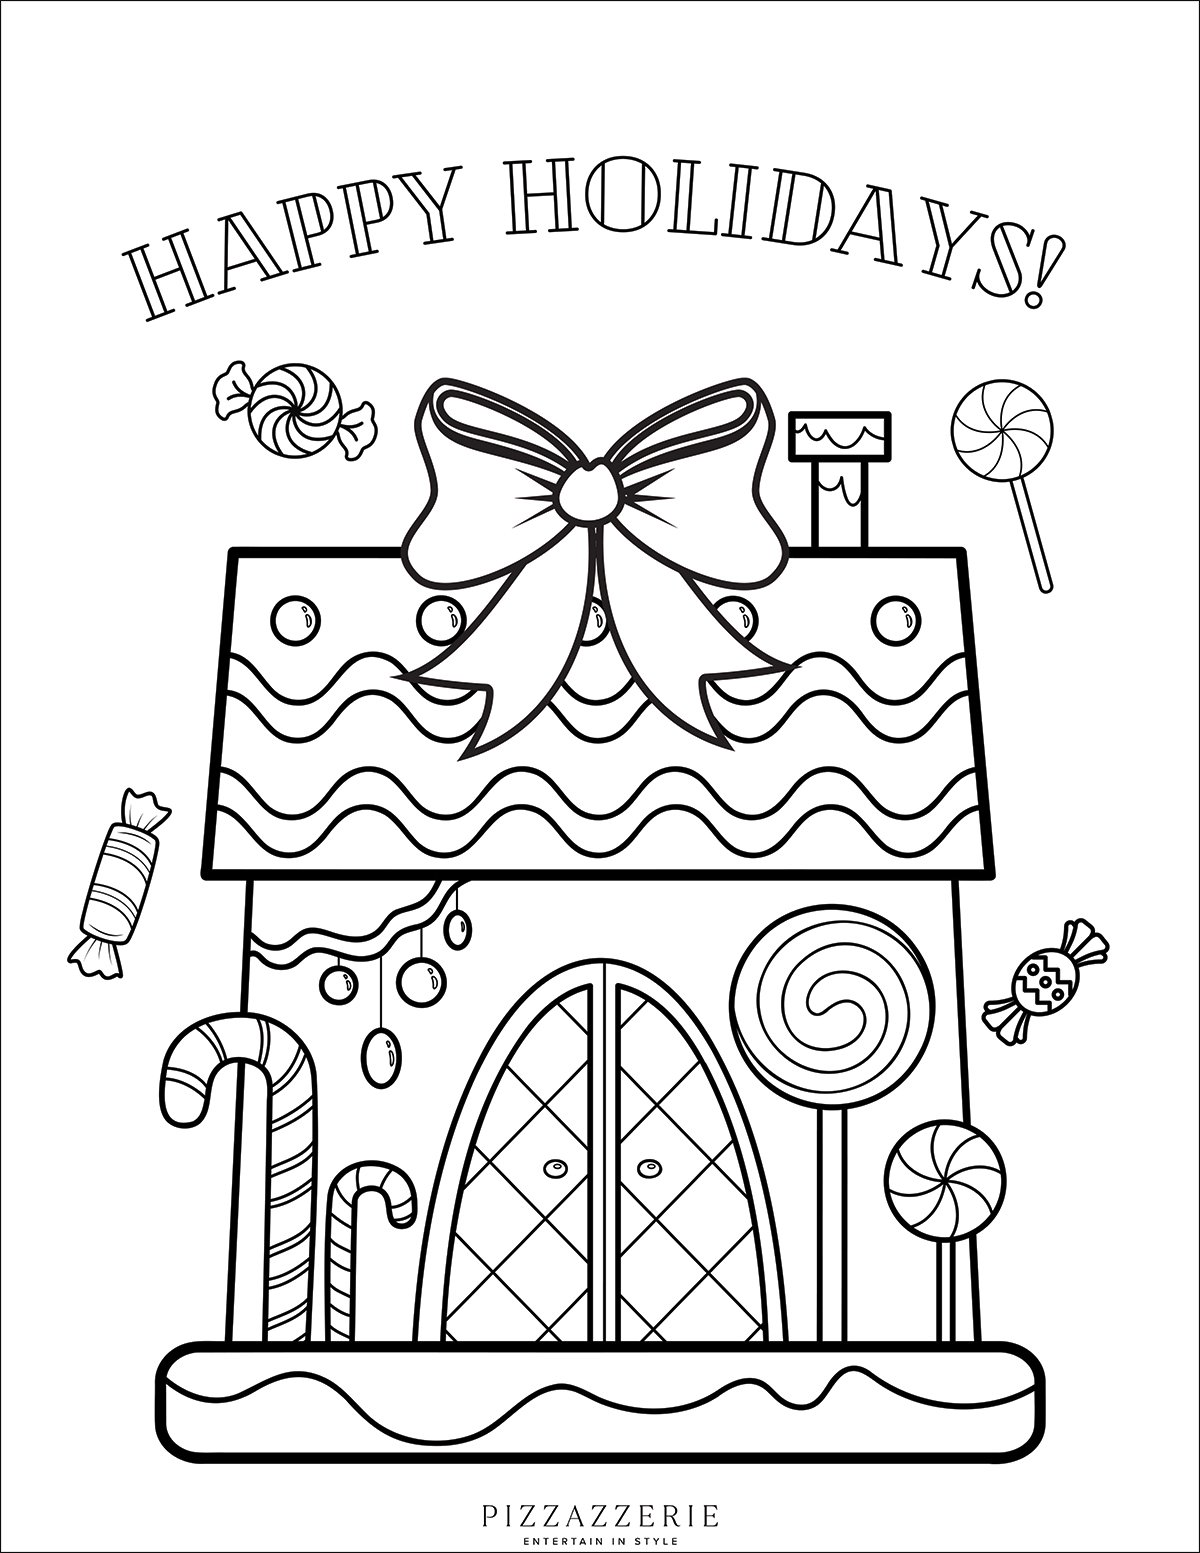 Gingerbread house coloring pages free printable pdfs